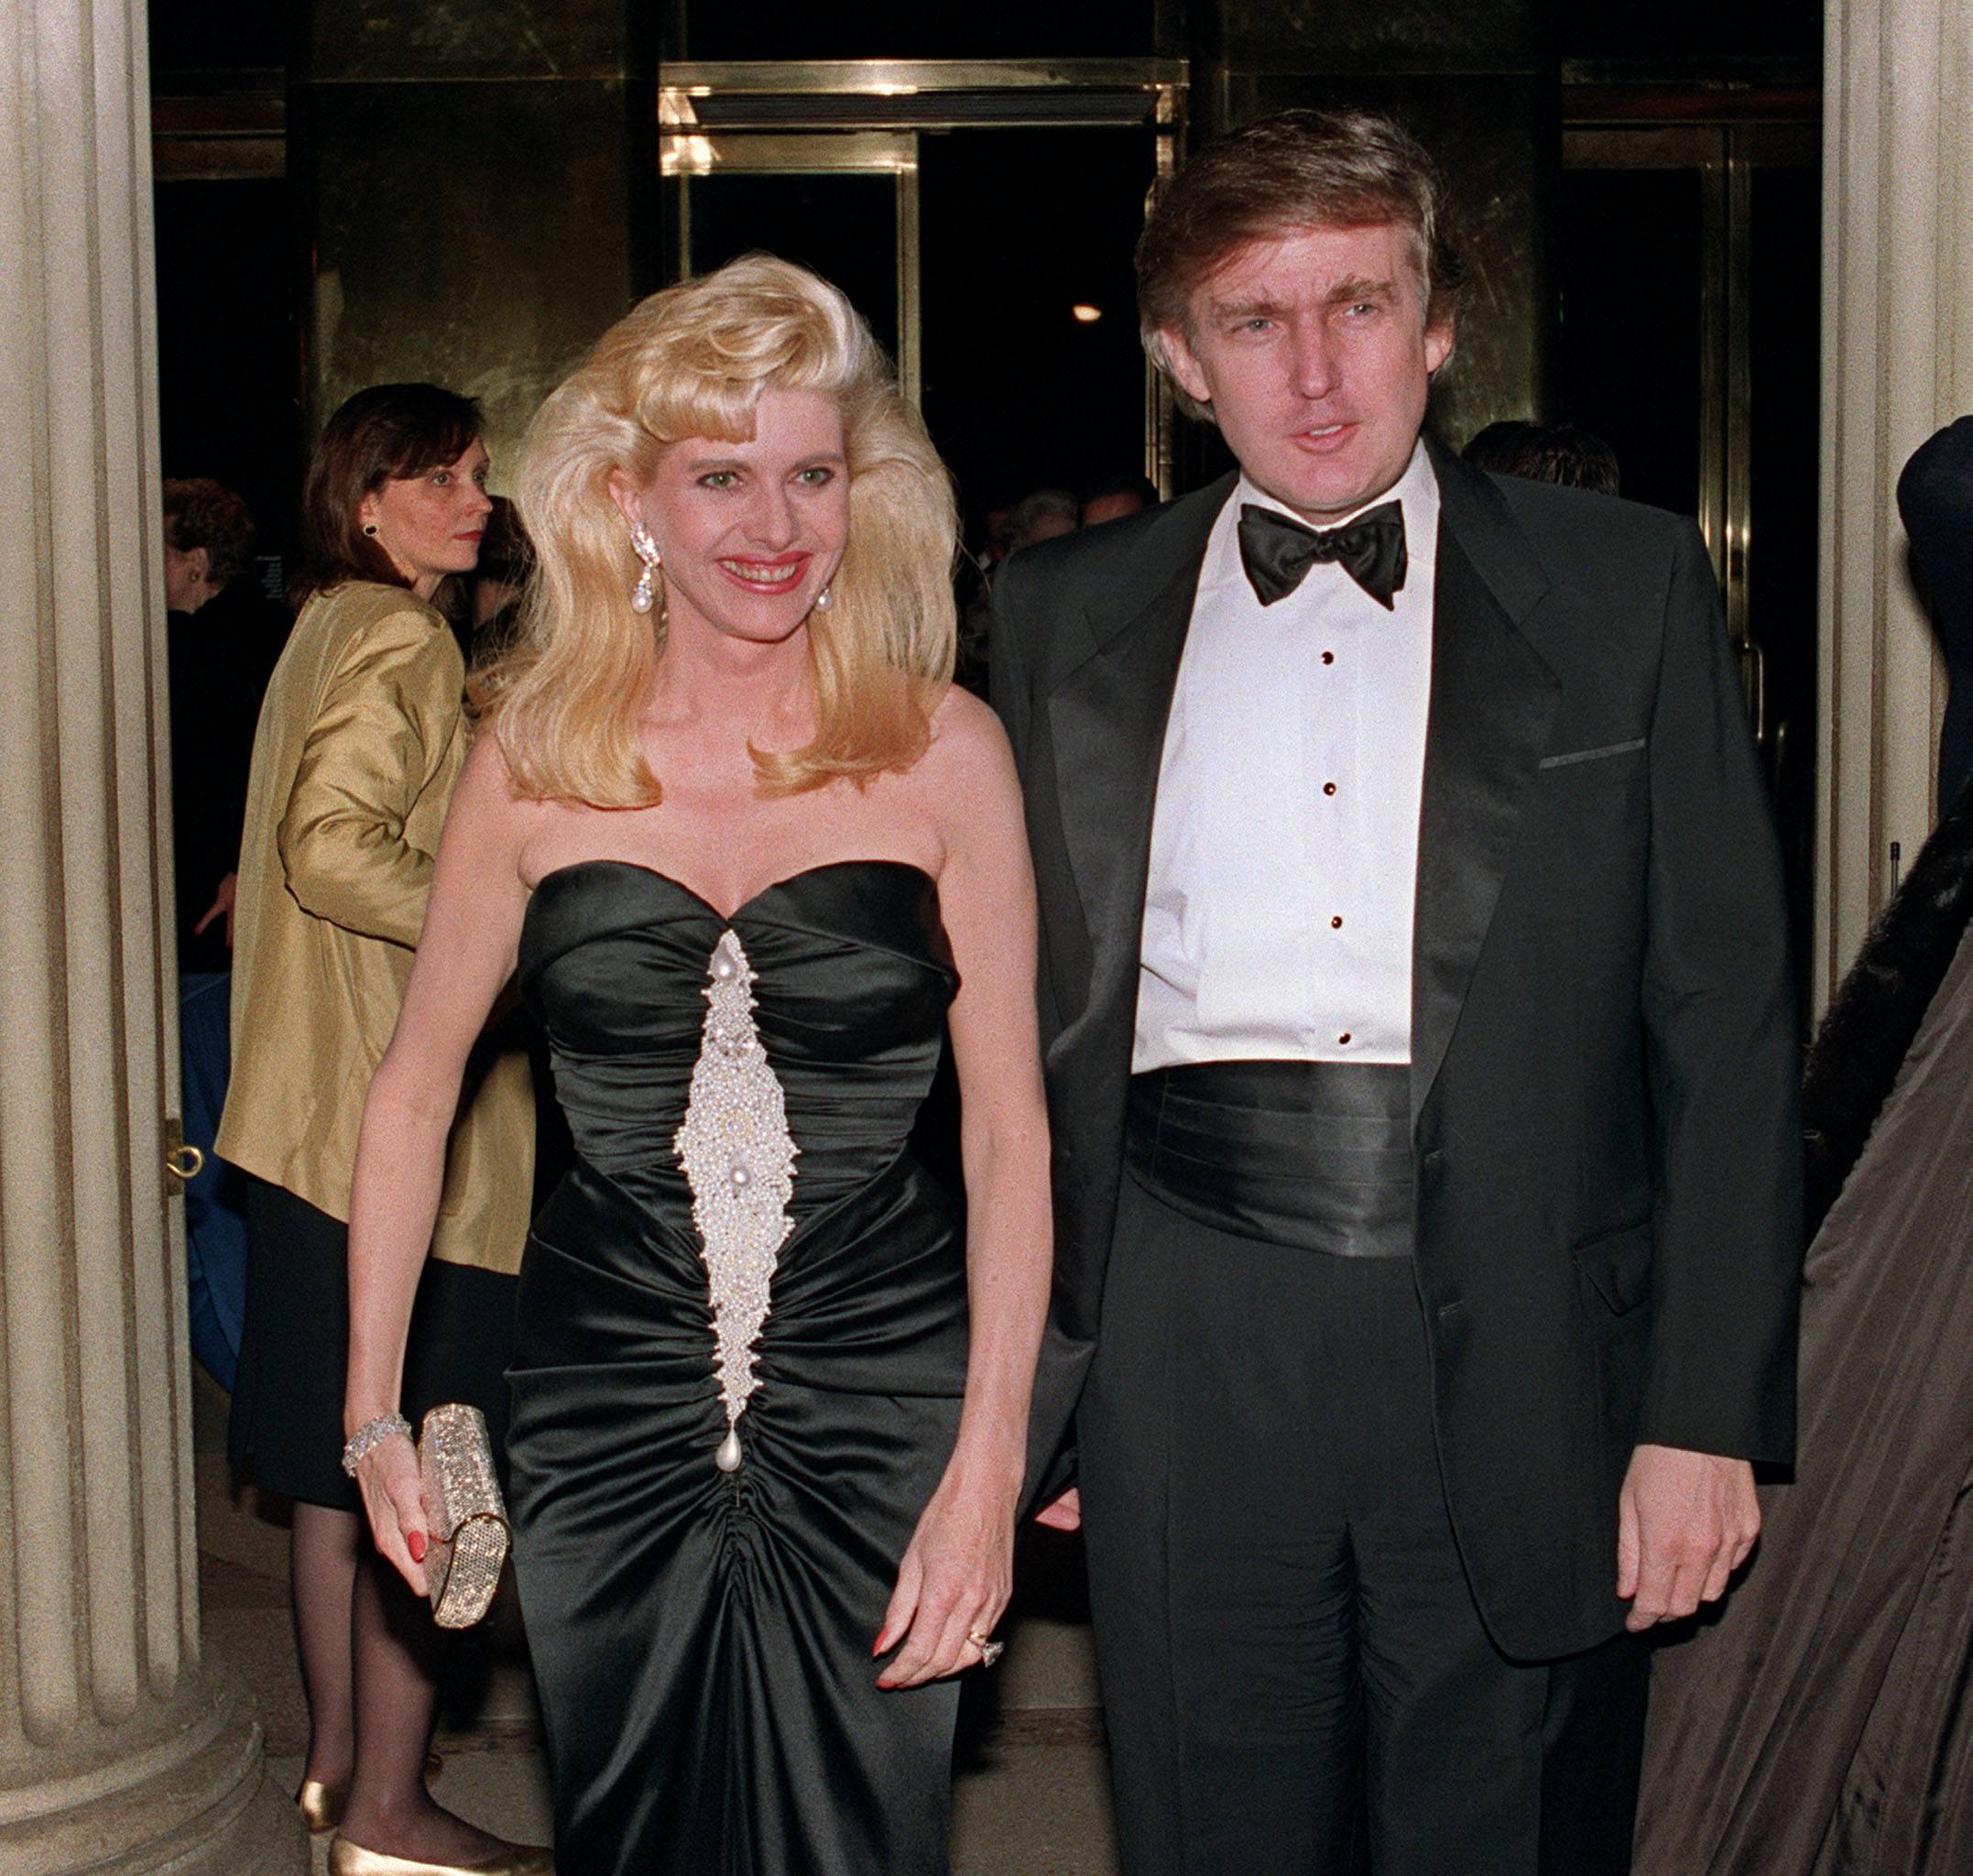 Ivana and Donald Trump at a formal event.